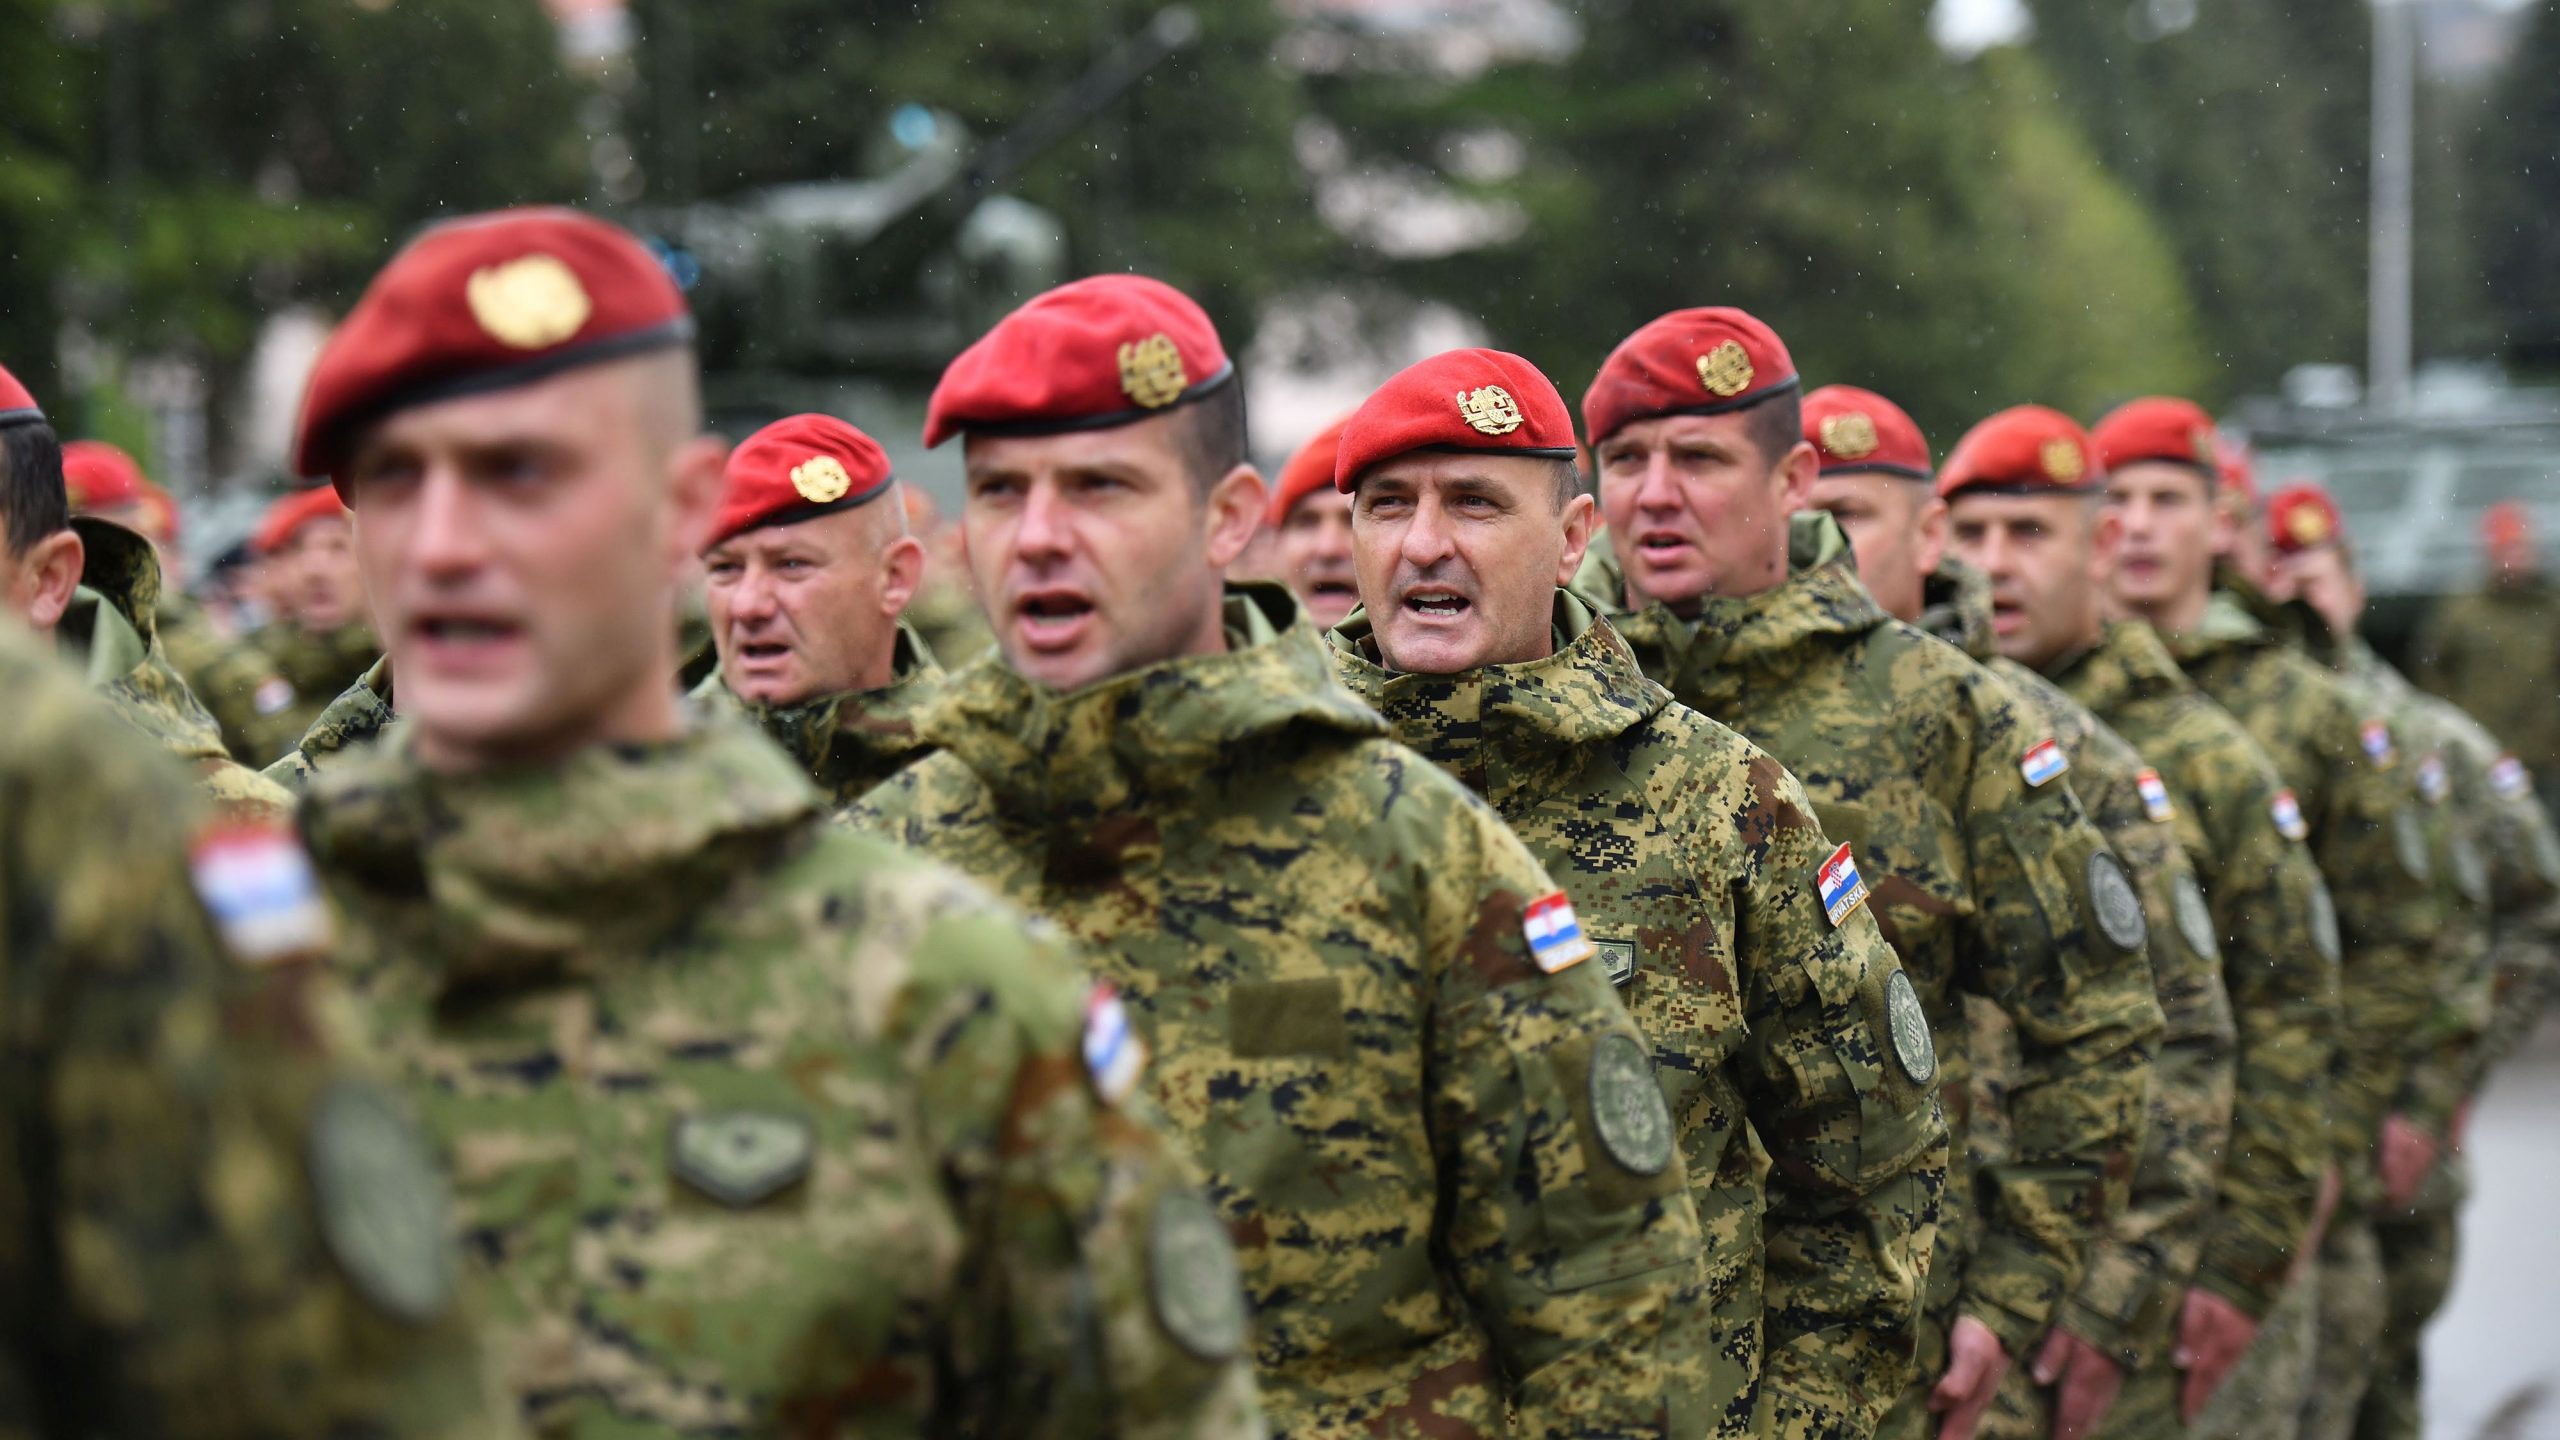 Berets awarded to Croatian Army “Spiders” 